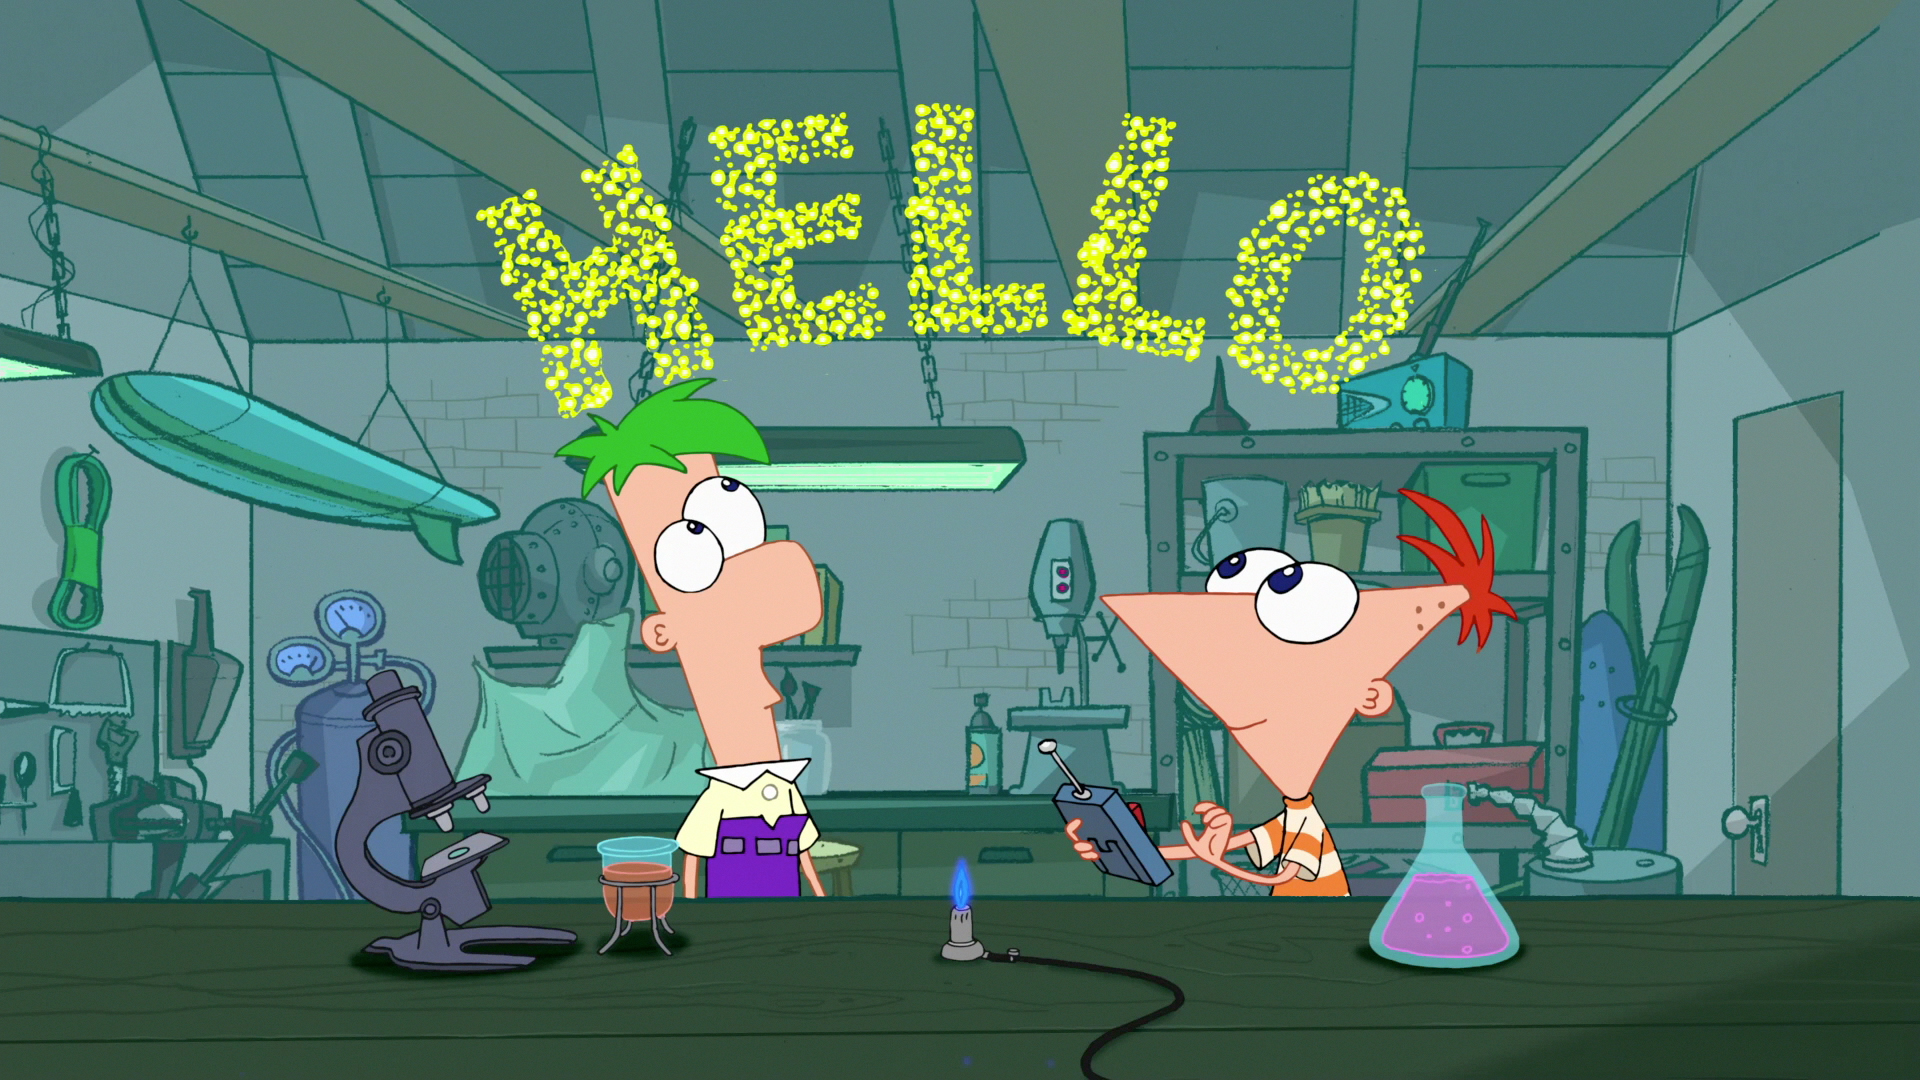 Image - Hello.jpg - Phineas and Ferb Wiki - Wikia